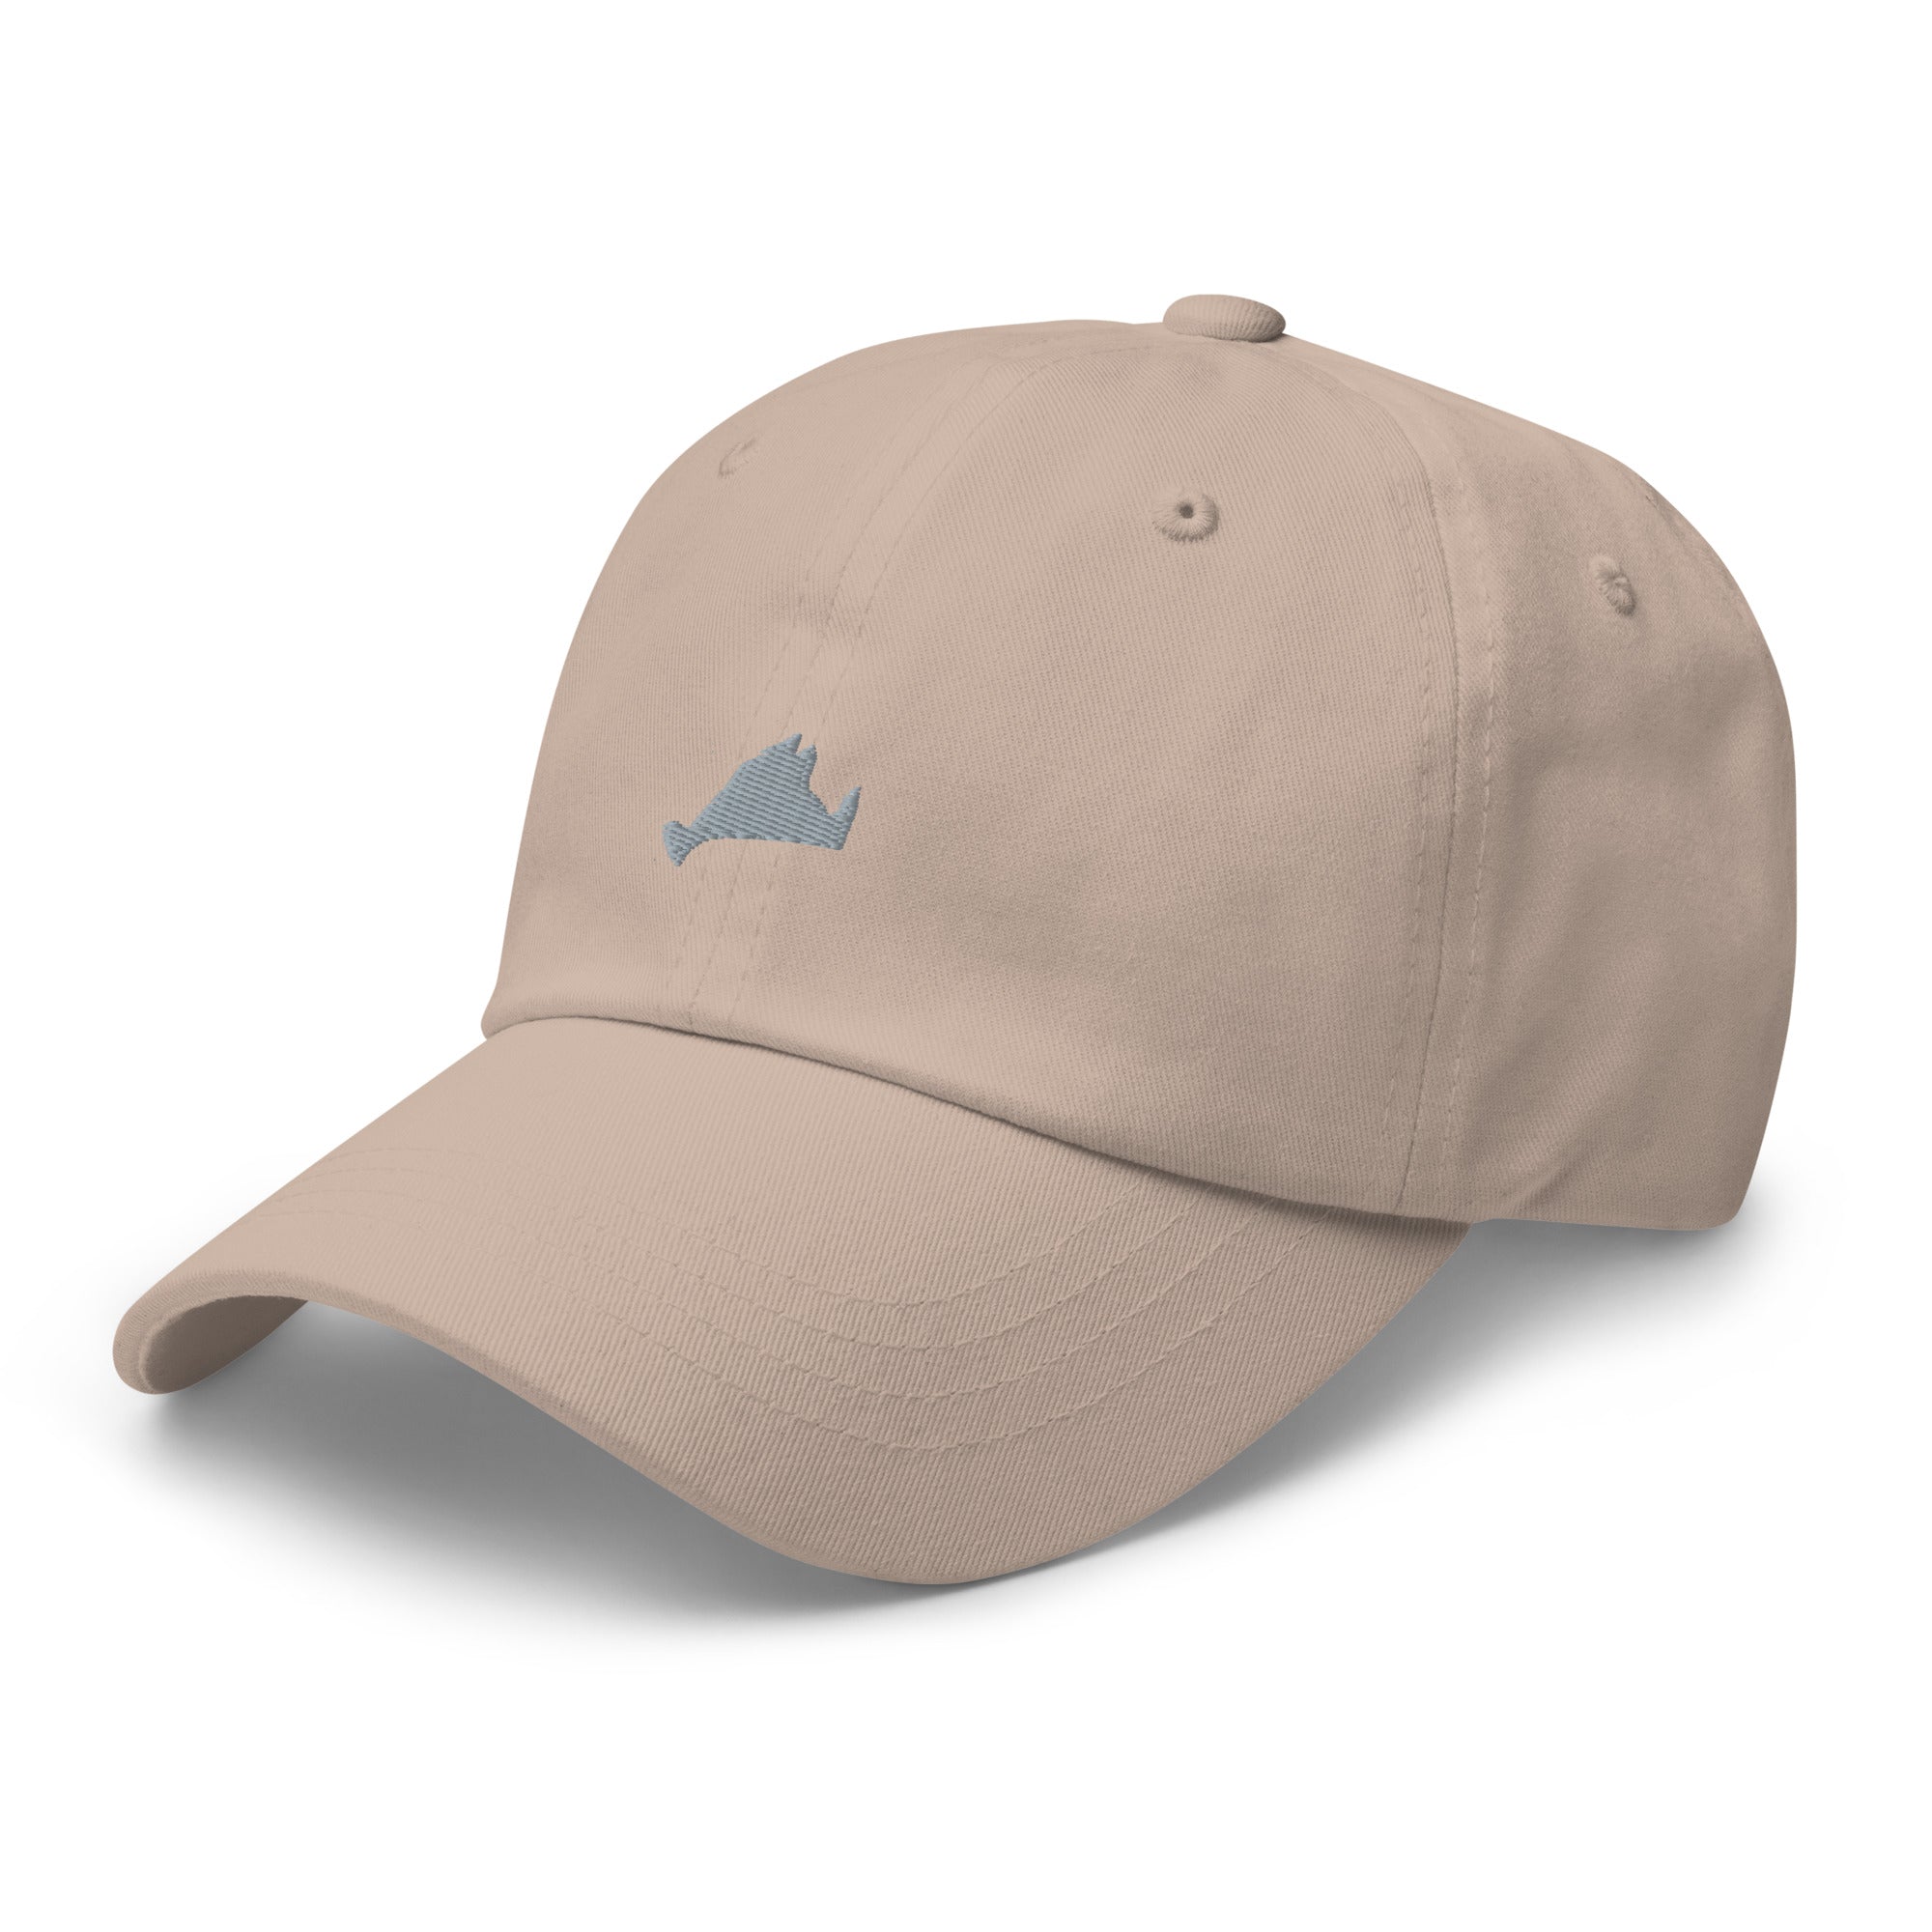 Silver Grey Embroidered Dad hat